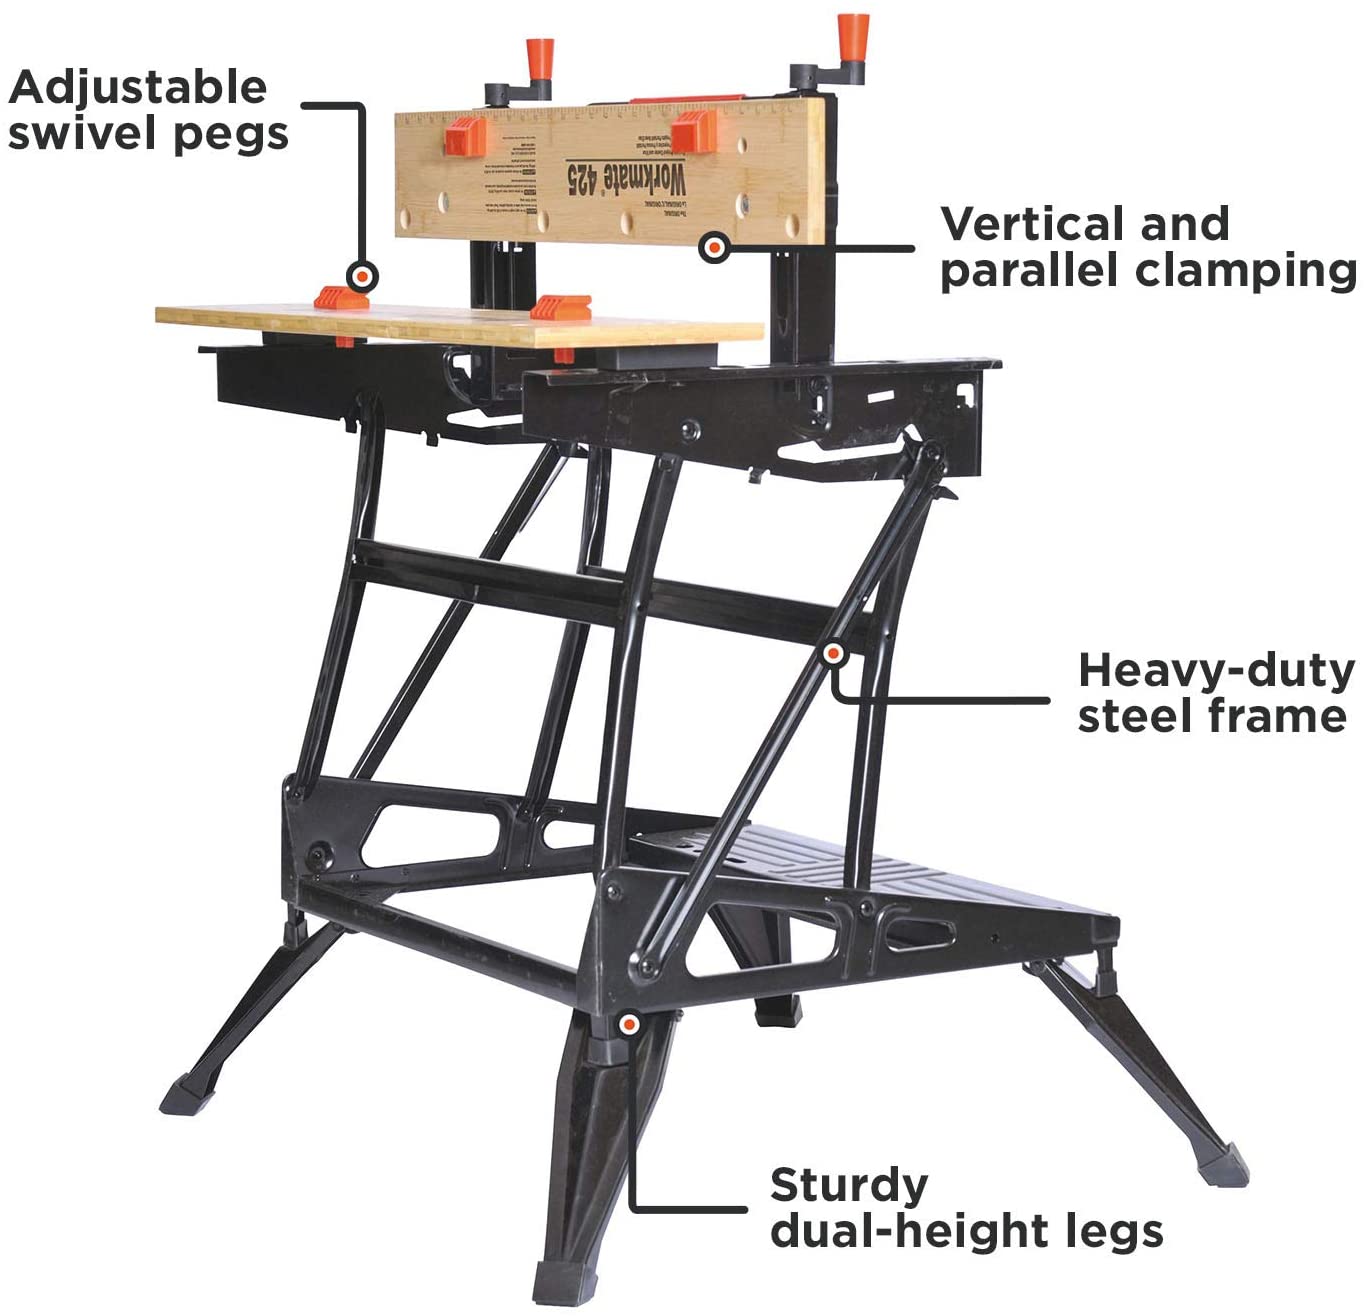 https://www.wideopencountry.com/wp-content/uploads/sites/4/2021/07/BLACKDECKER-Portable-Workbench-Project-Center-and-Vise-WM425-A-.jpg?resize=1364%2C1316